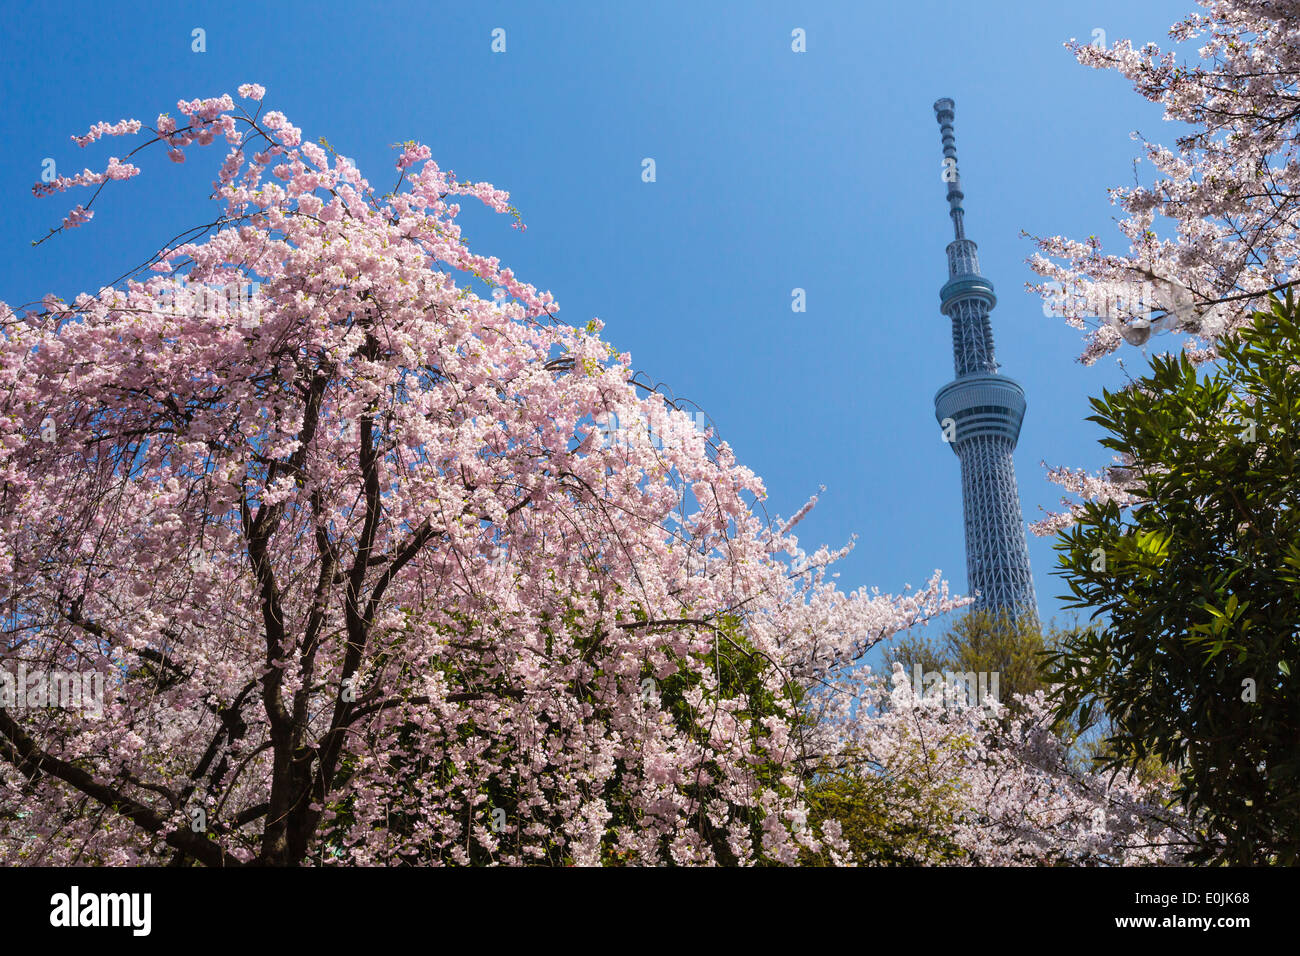 Tokyo skytree tower and cherry blossoms Stock Photo